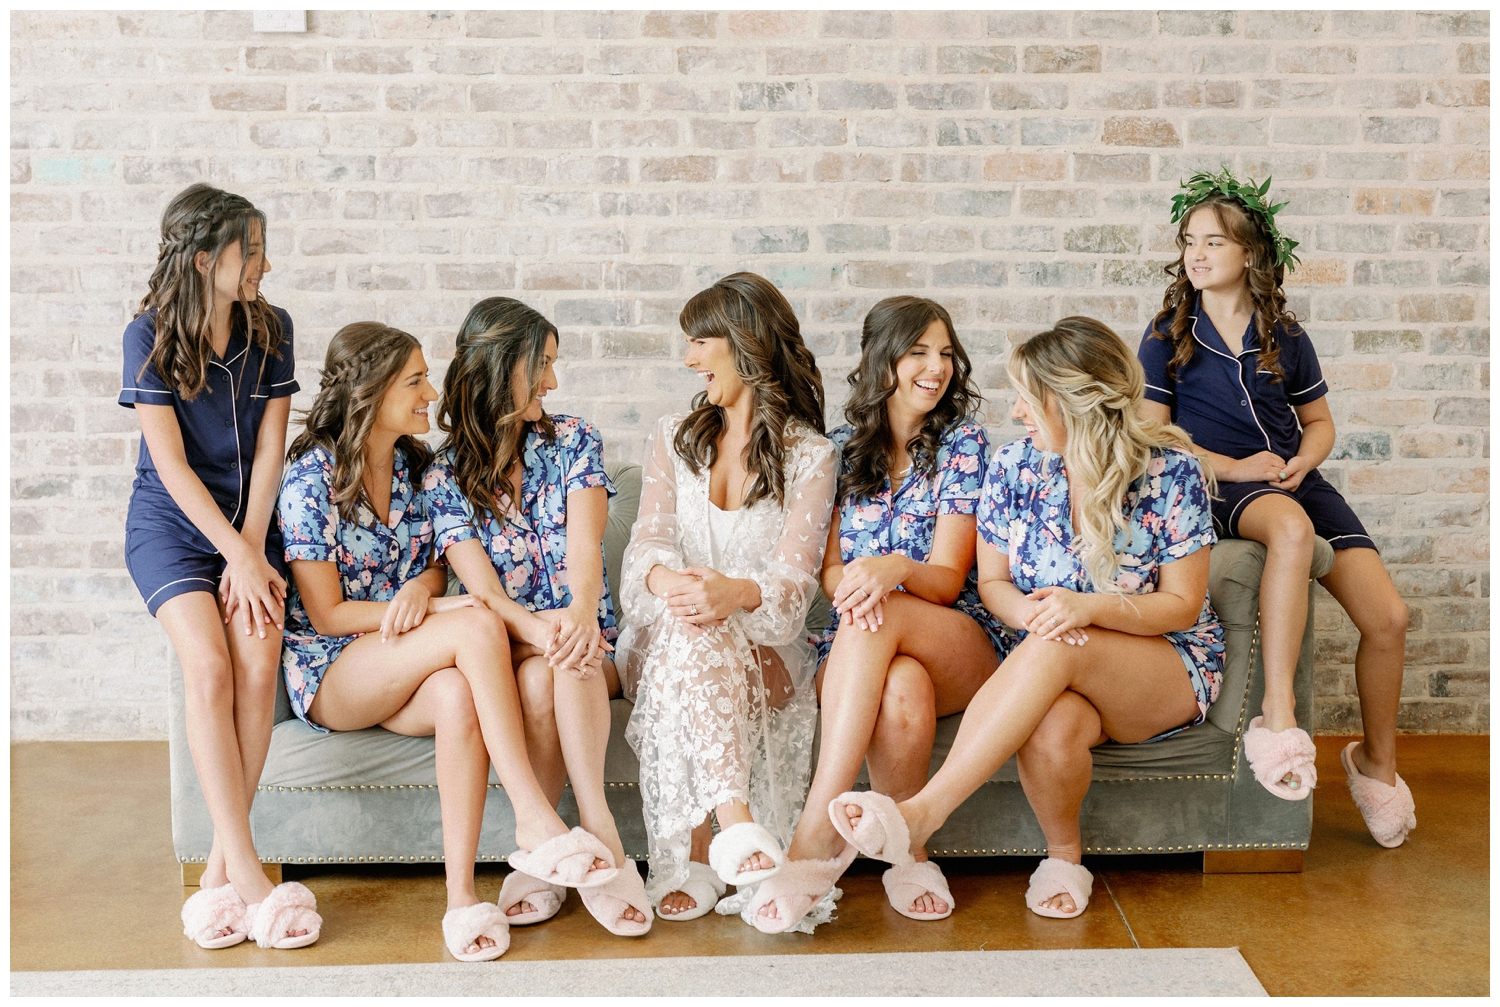 Iron Manor bridal suite with bride and bridesmaid sitting on couch in pajamas